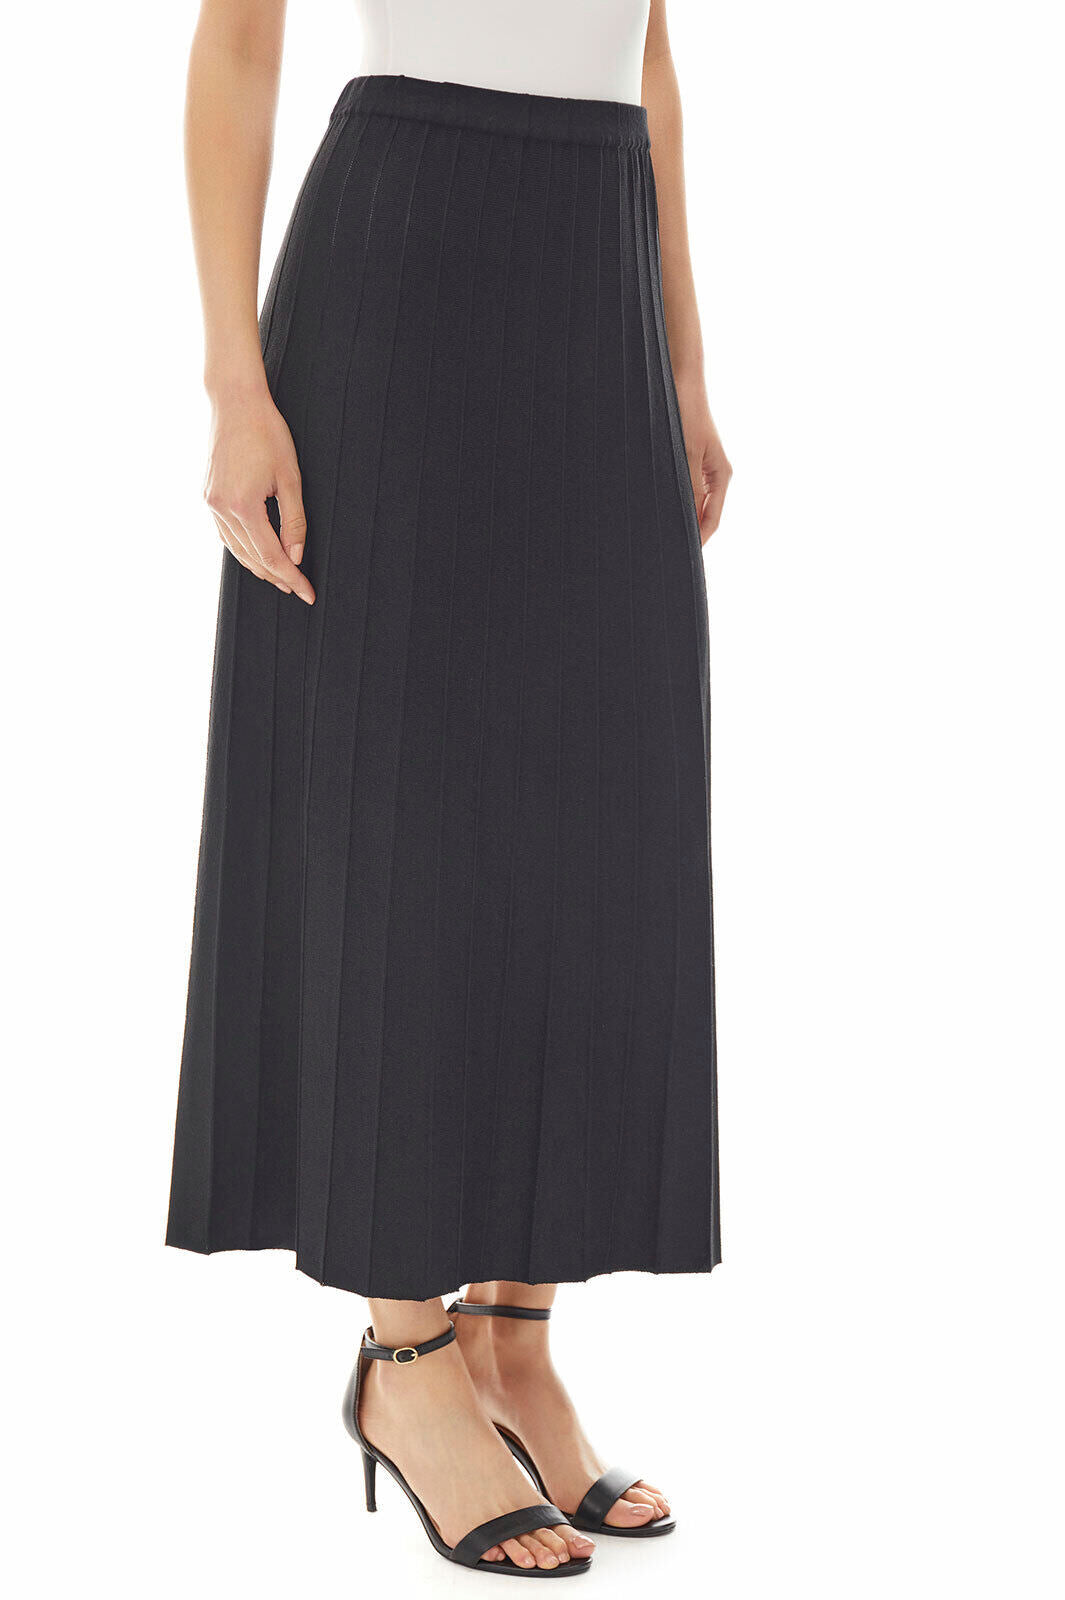 JNGSA Women's Pleated Maxi Skirts High Waist Ruched Soild Color Vintage  Loose Beach Wrap Long Skirt Summer Flowy Skirts for Party Black -  Walmart.com